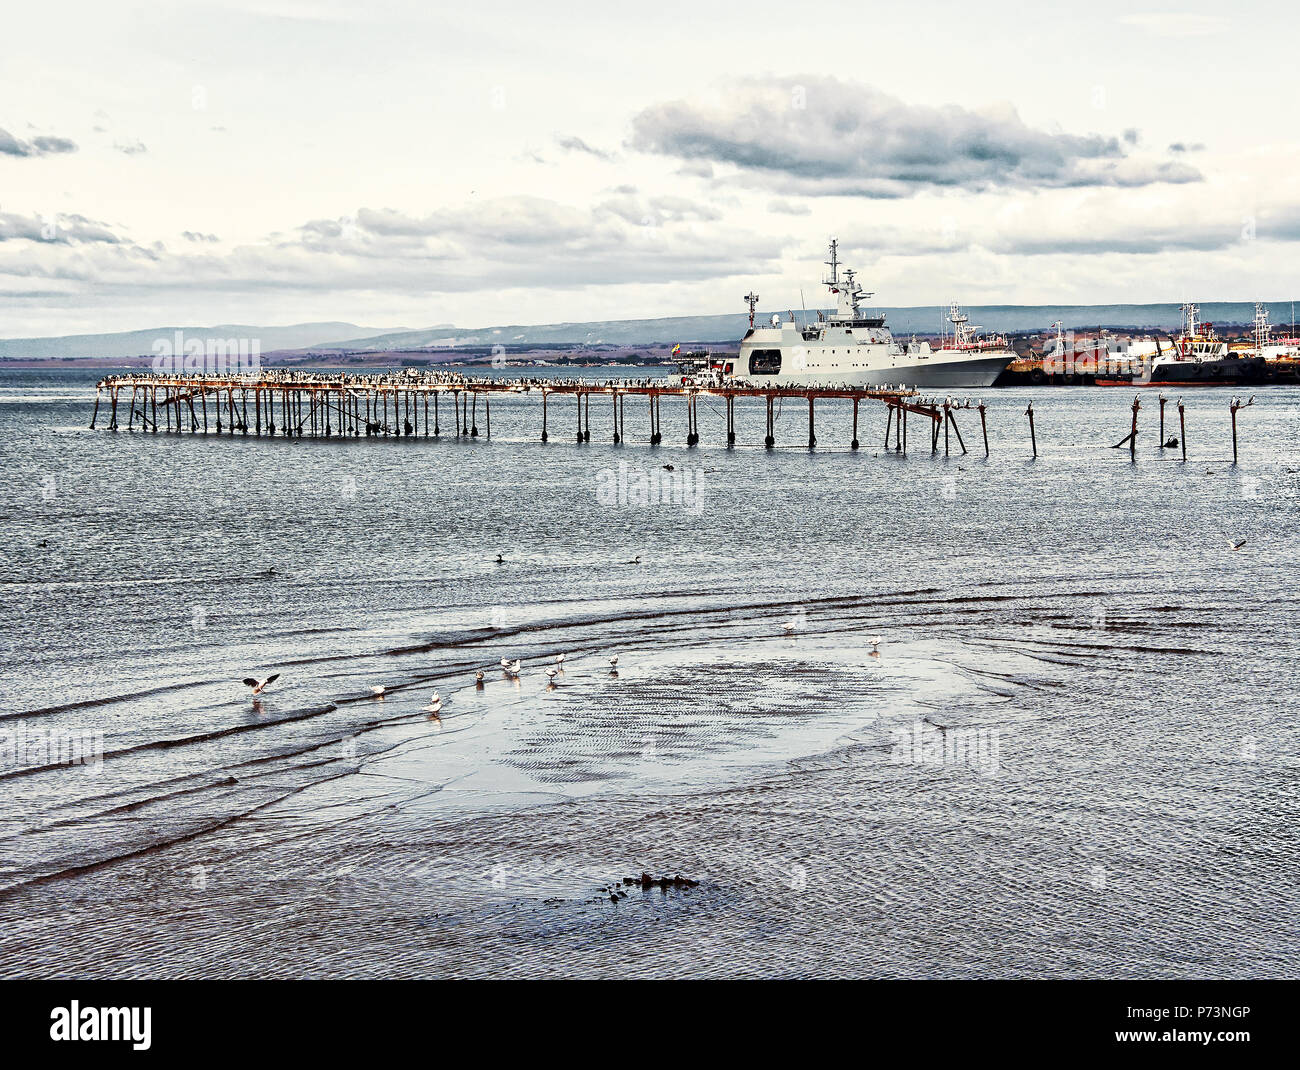 Scenic view  of the harbour and the seaport in Punta Arenas, Chile with standing at the pier large ship Stock Photo